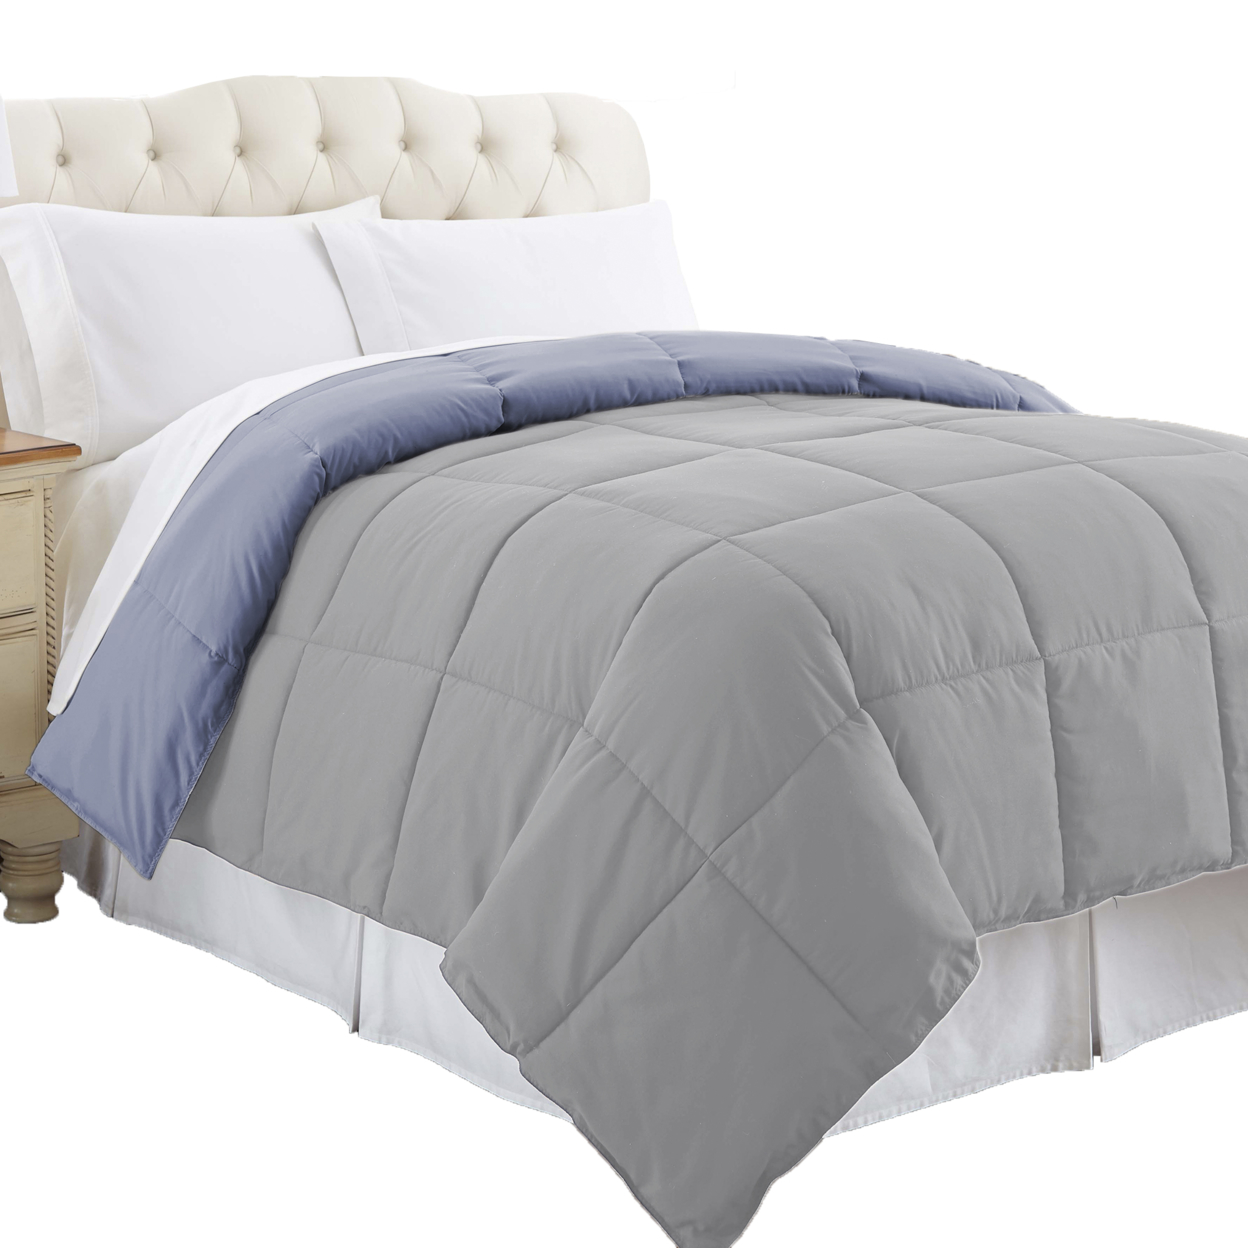 Genoa Reversible King Comforter With Box Quilted The Urban Port, Silver And Blue- Saltoro Sherpi